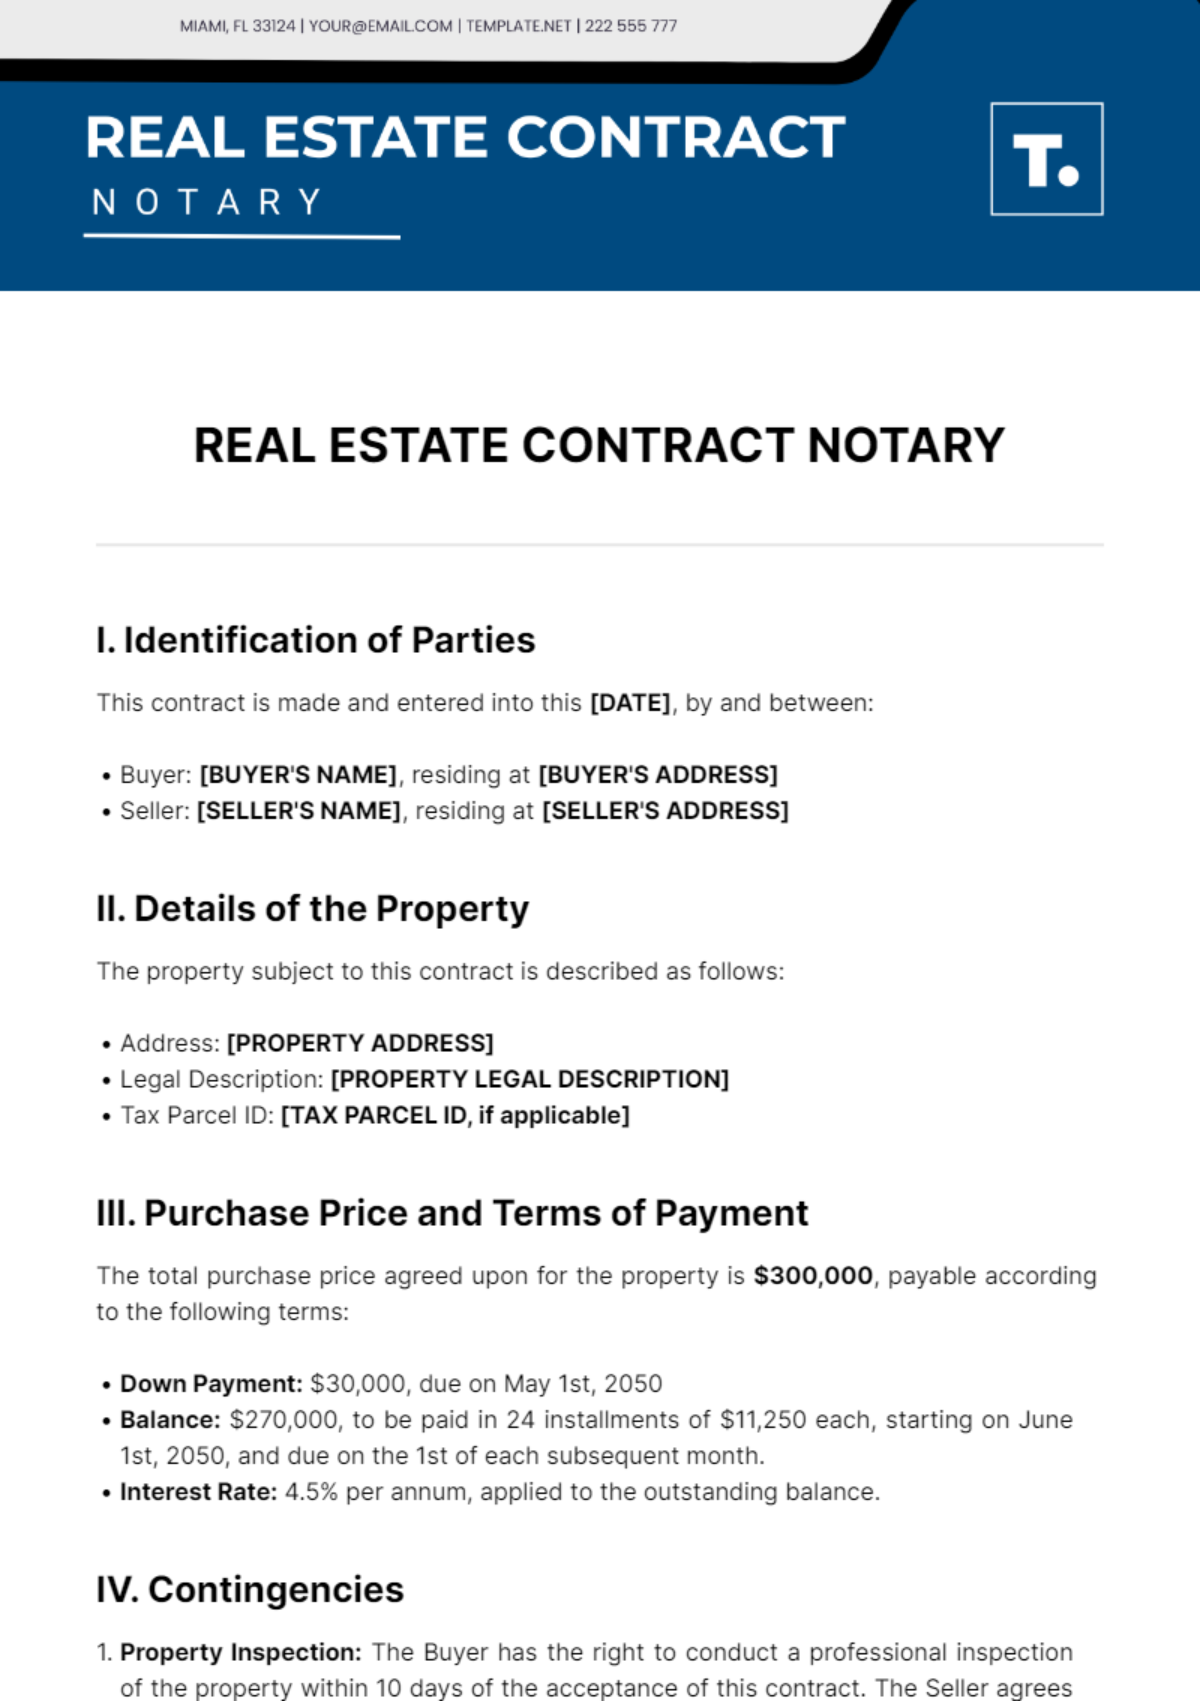 Free Real Estate Contract Notary Template